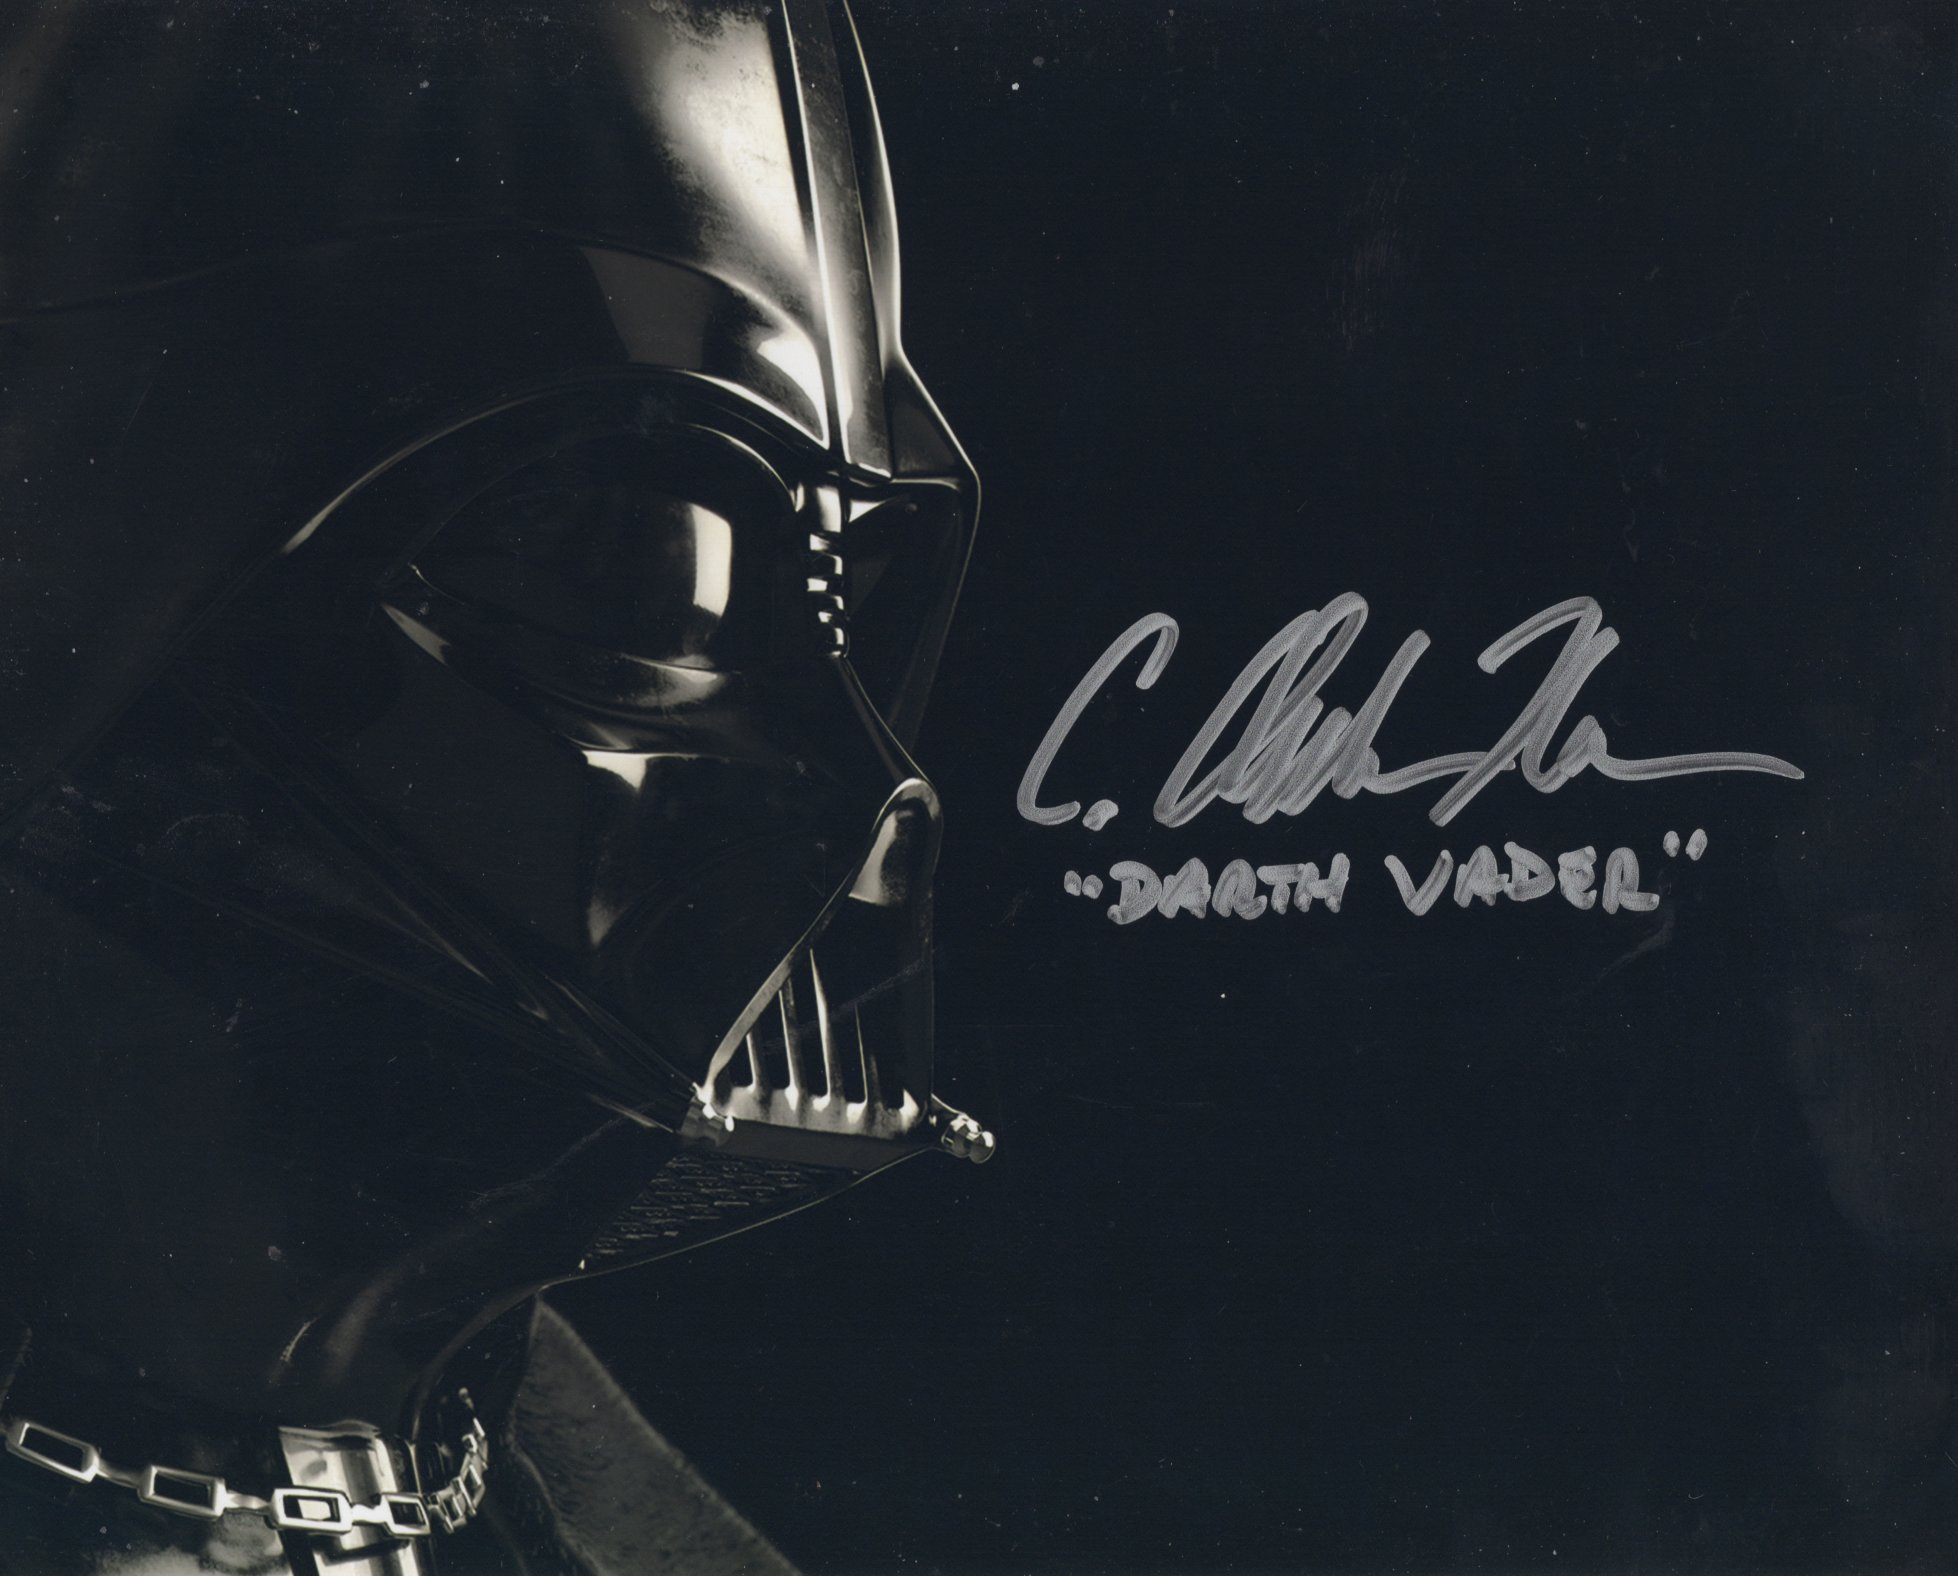 Star Wars The Phantom Menace Darth Vader body double actor C Andrew Nelson signed 8x10 B/W photo.